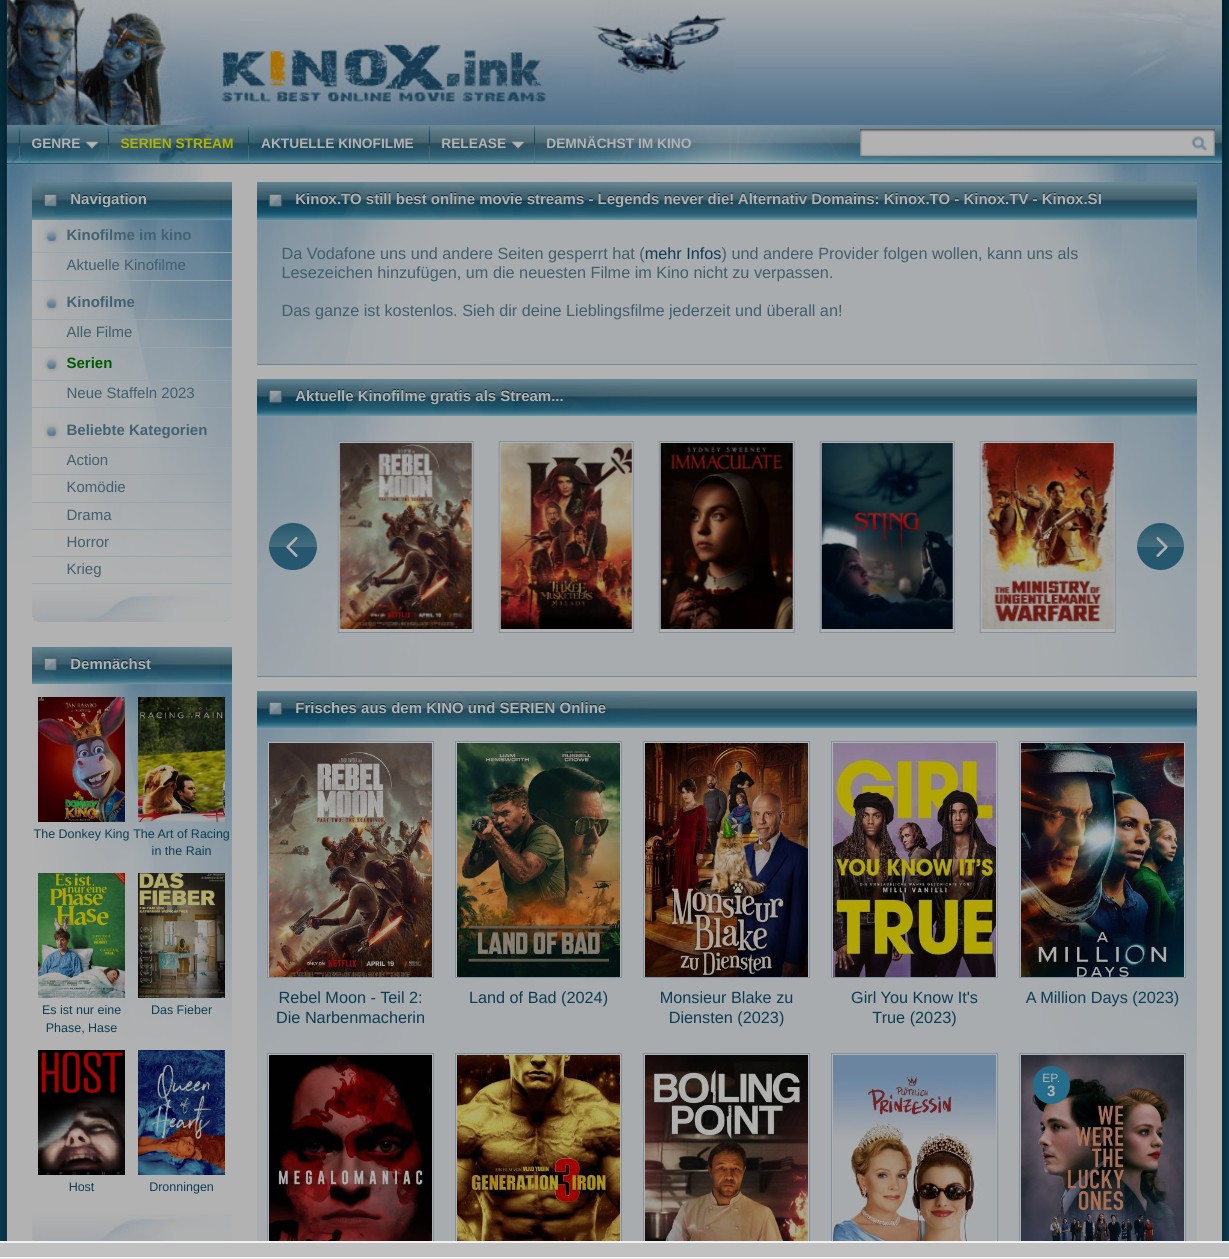 kinox.tours also leads to a subscription trap